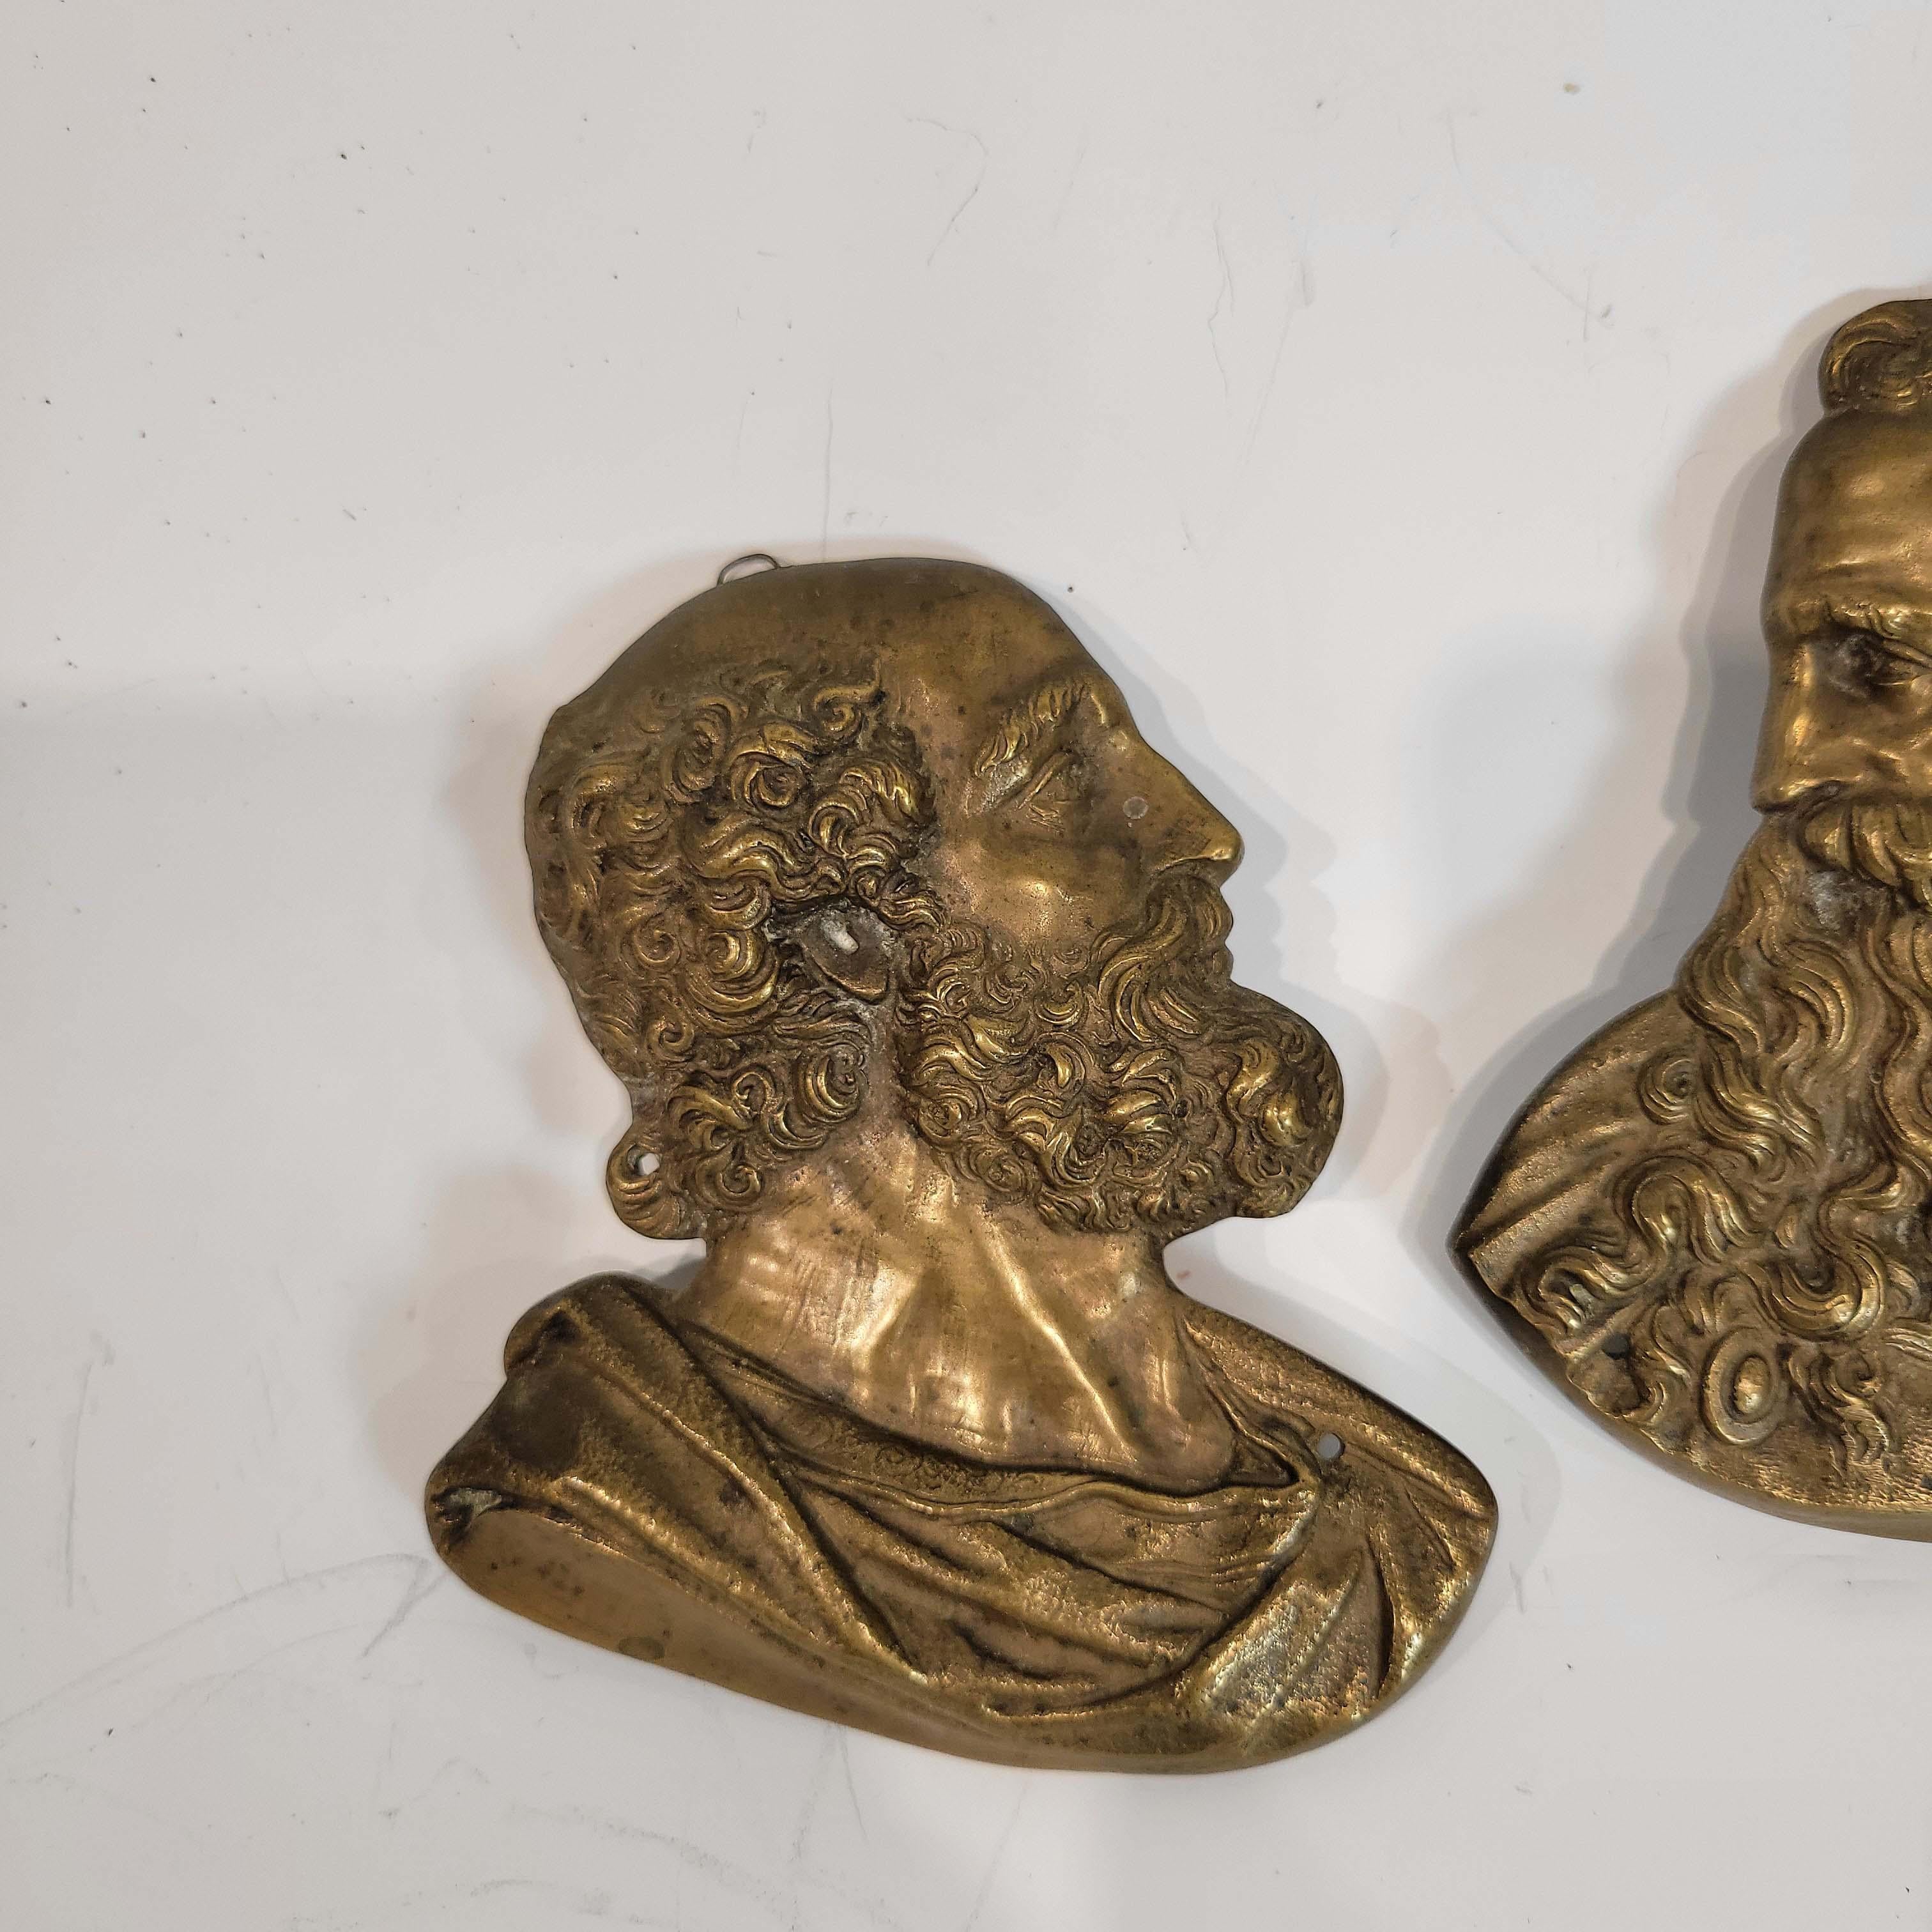 Beautifully cast and chased in renaissance manner. There are two holes in each plaque , one behind their garment and one behind their heads, probably for mounting at one time. Solid bronze, lost wax casting technique.